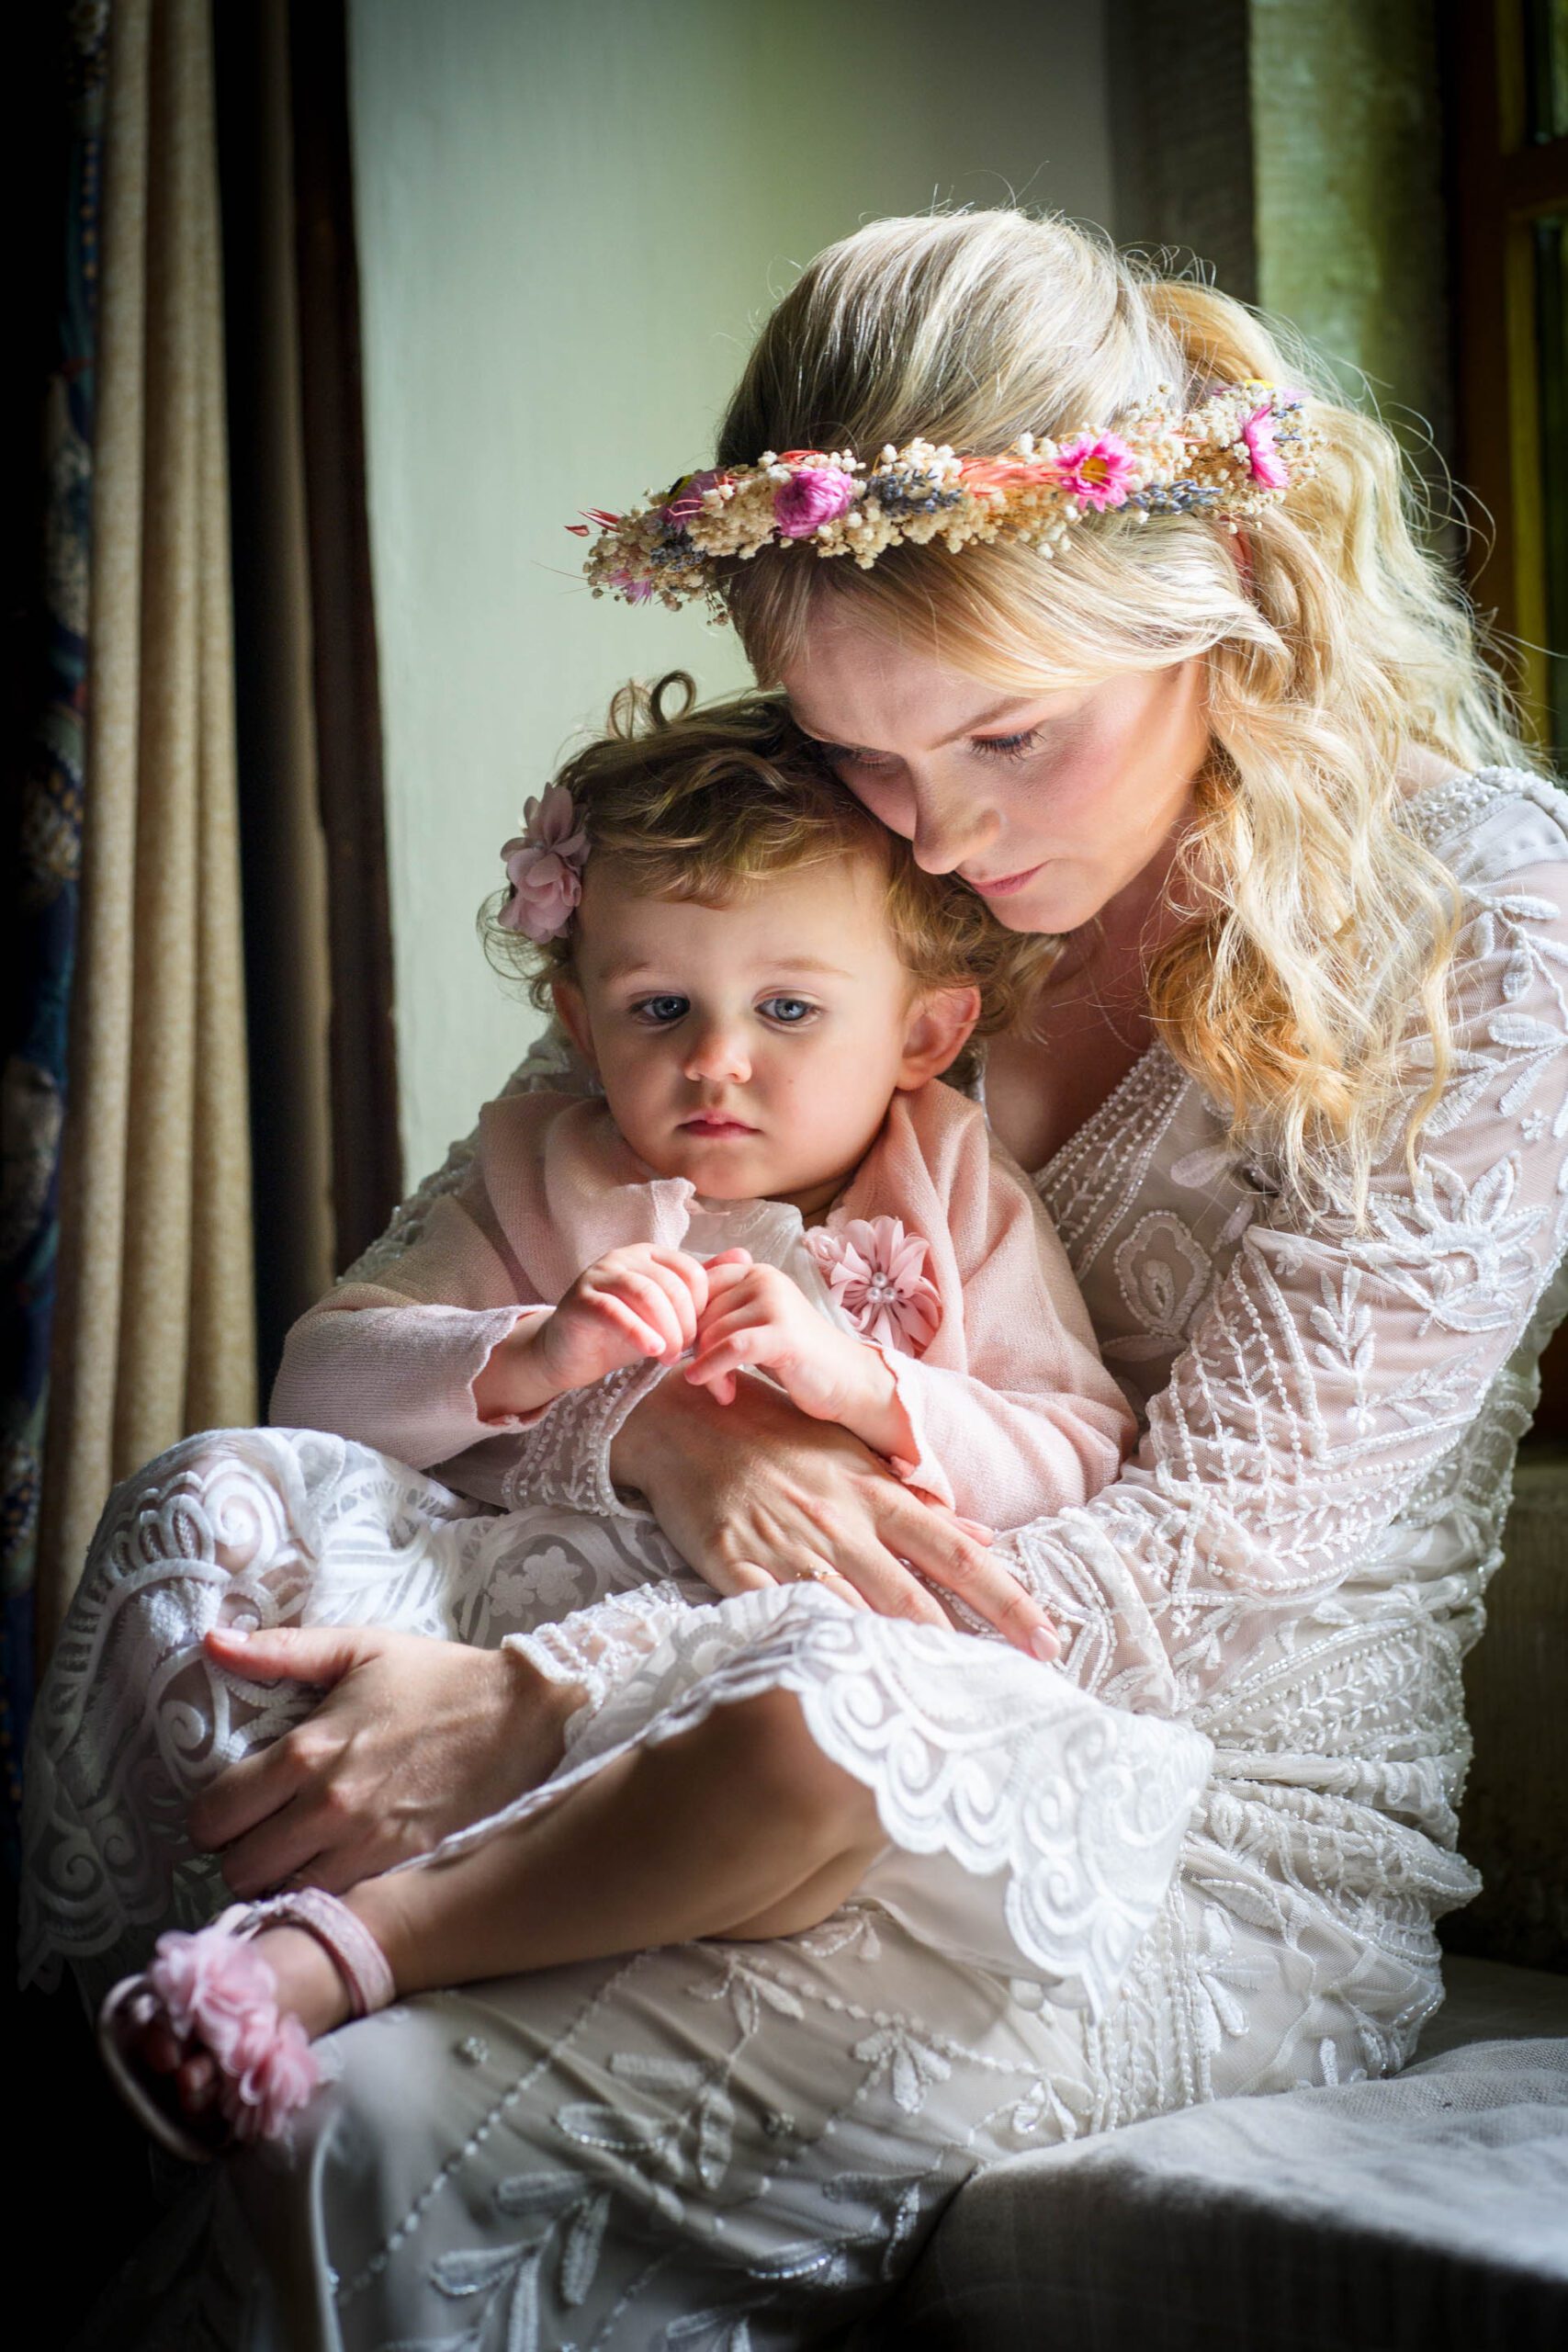 Chloe and her daughter Willow enjoying a peaceful moment together prior to her wedding ceremony